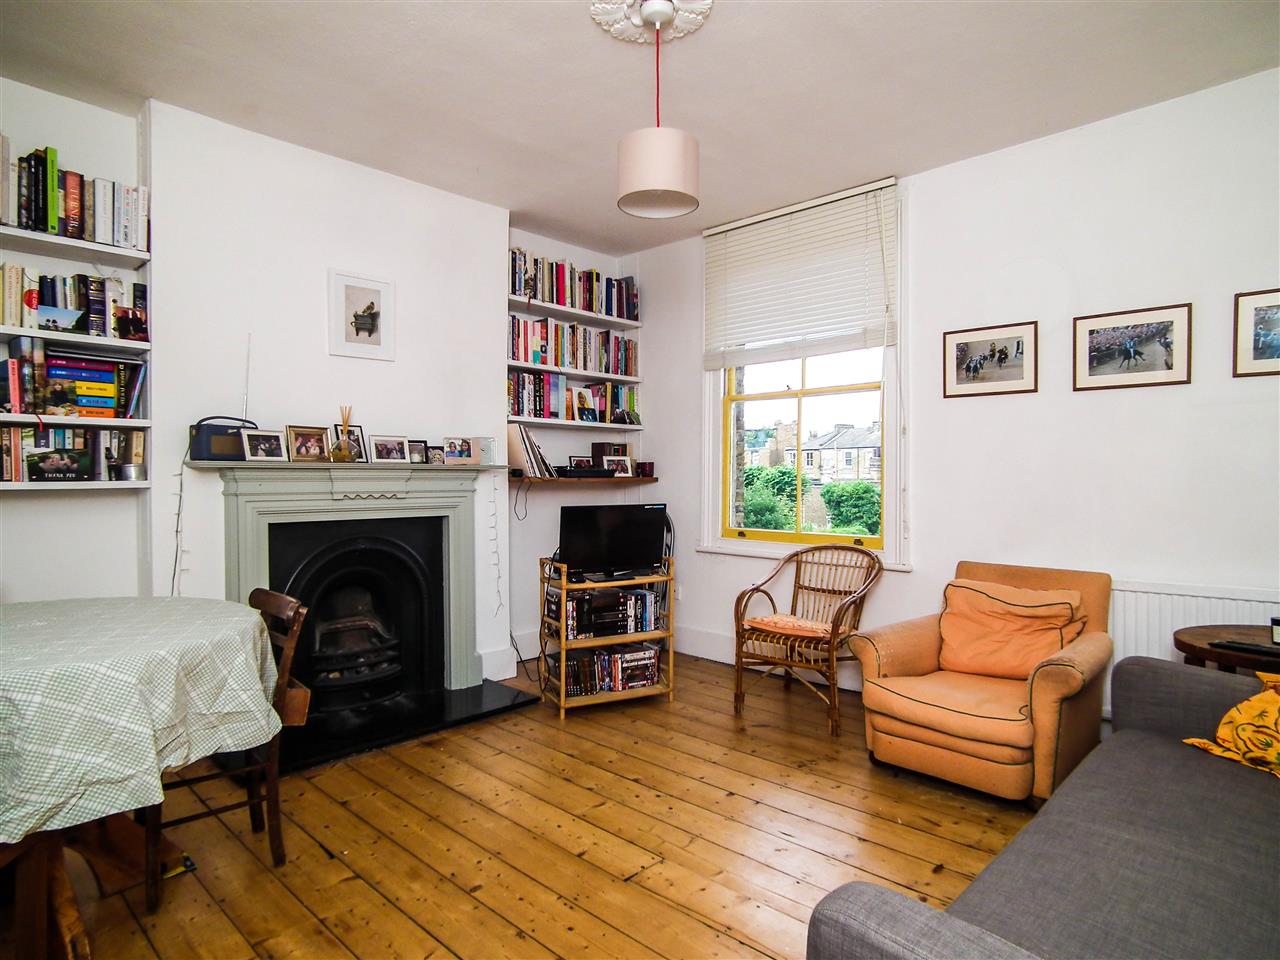 2 bed flat to rent in Mercers Road - Property Image 1